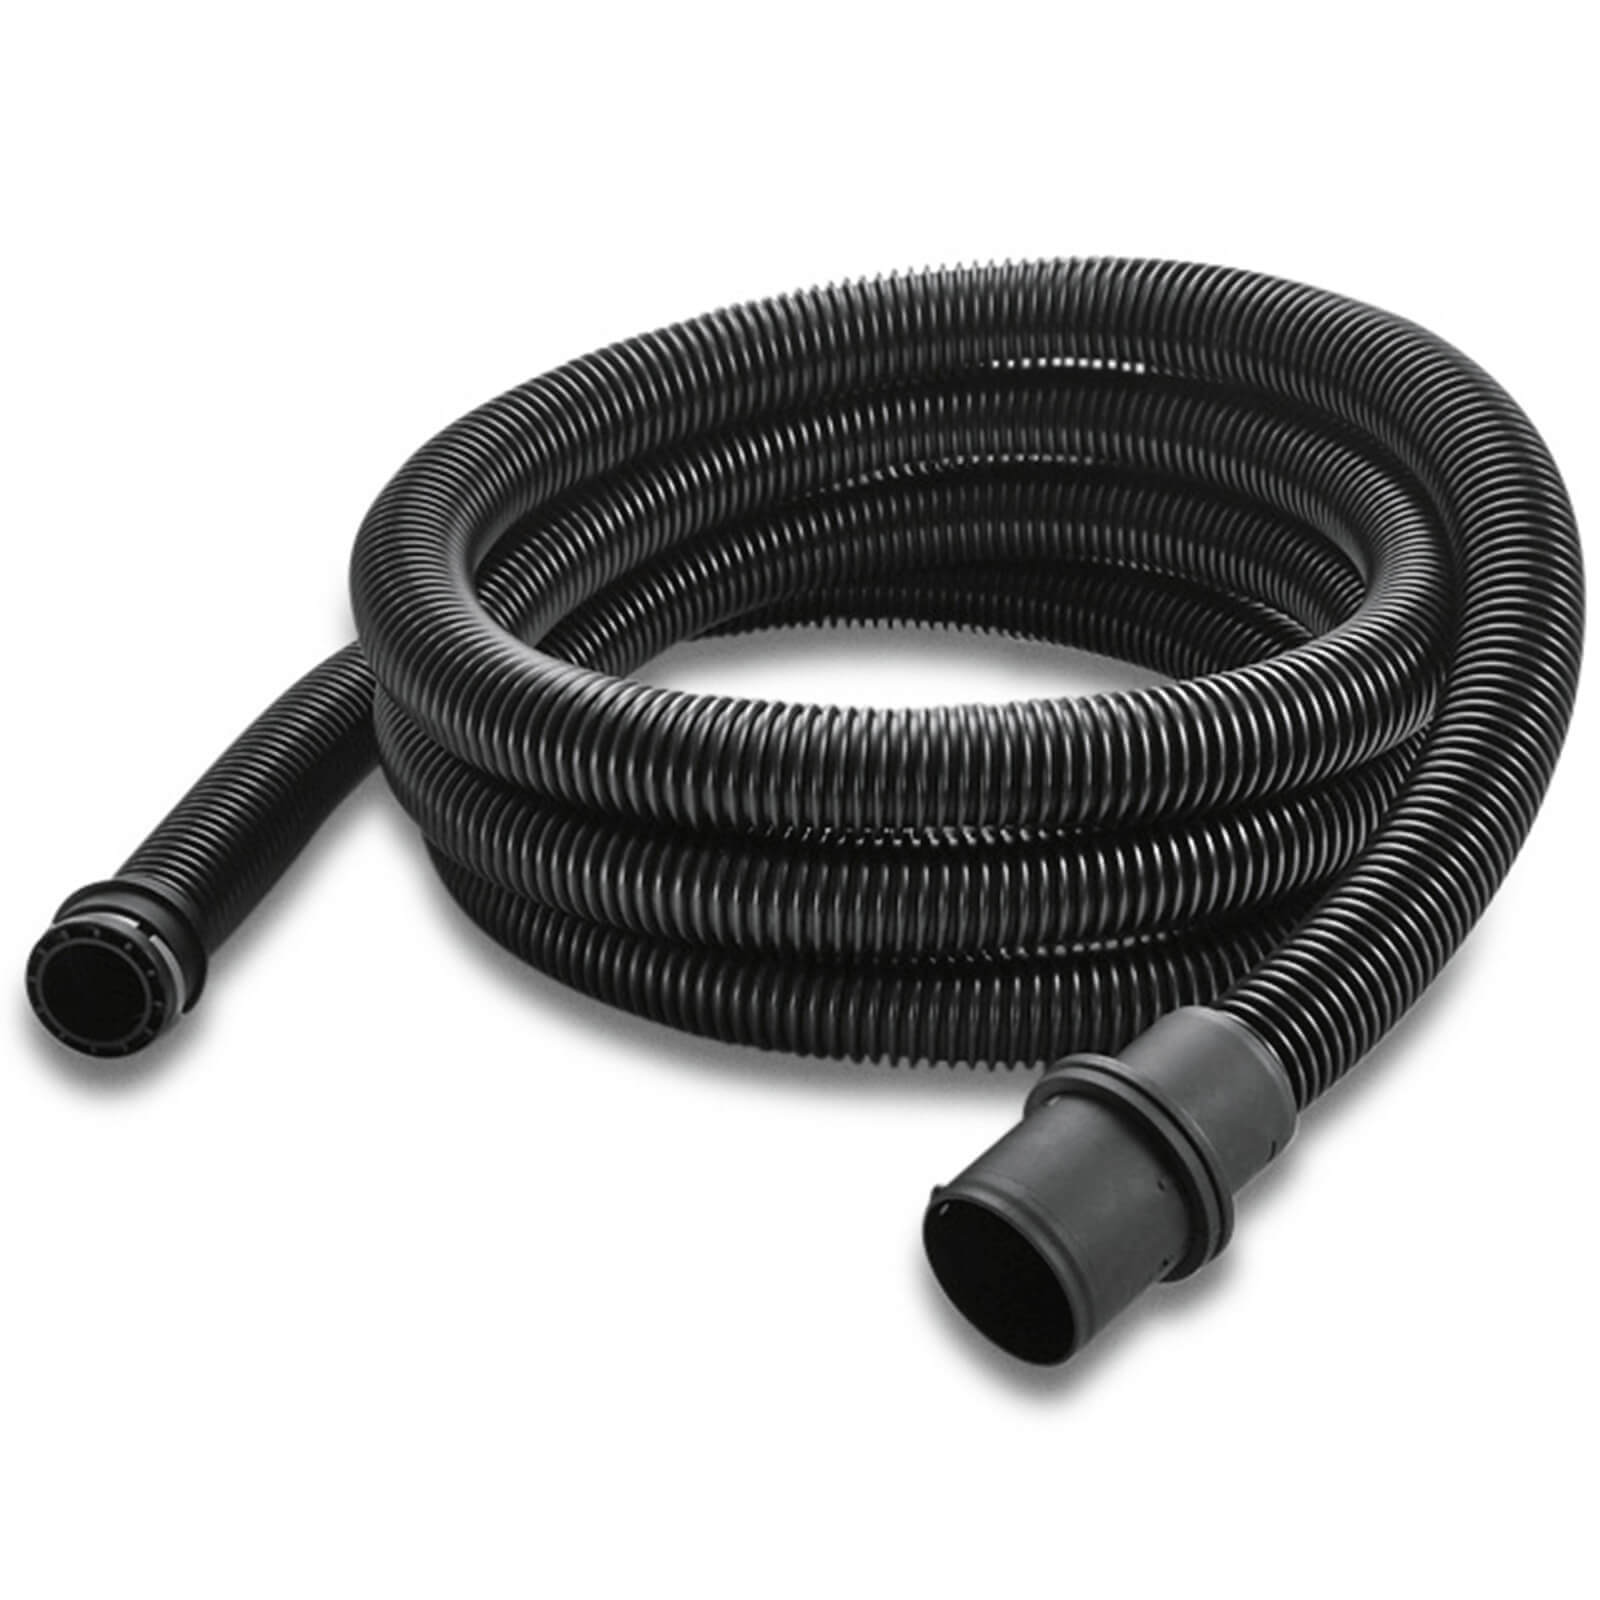 Karcher Anti Static Suction Hose for NT 27/1, 35/1, 45/1 and 48/1 Vacuum Cleaners 35mm 4m